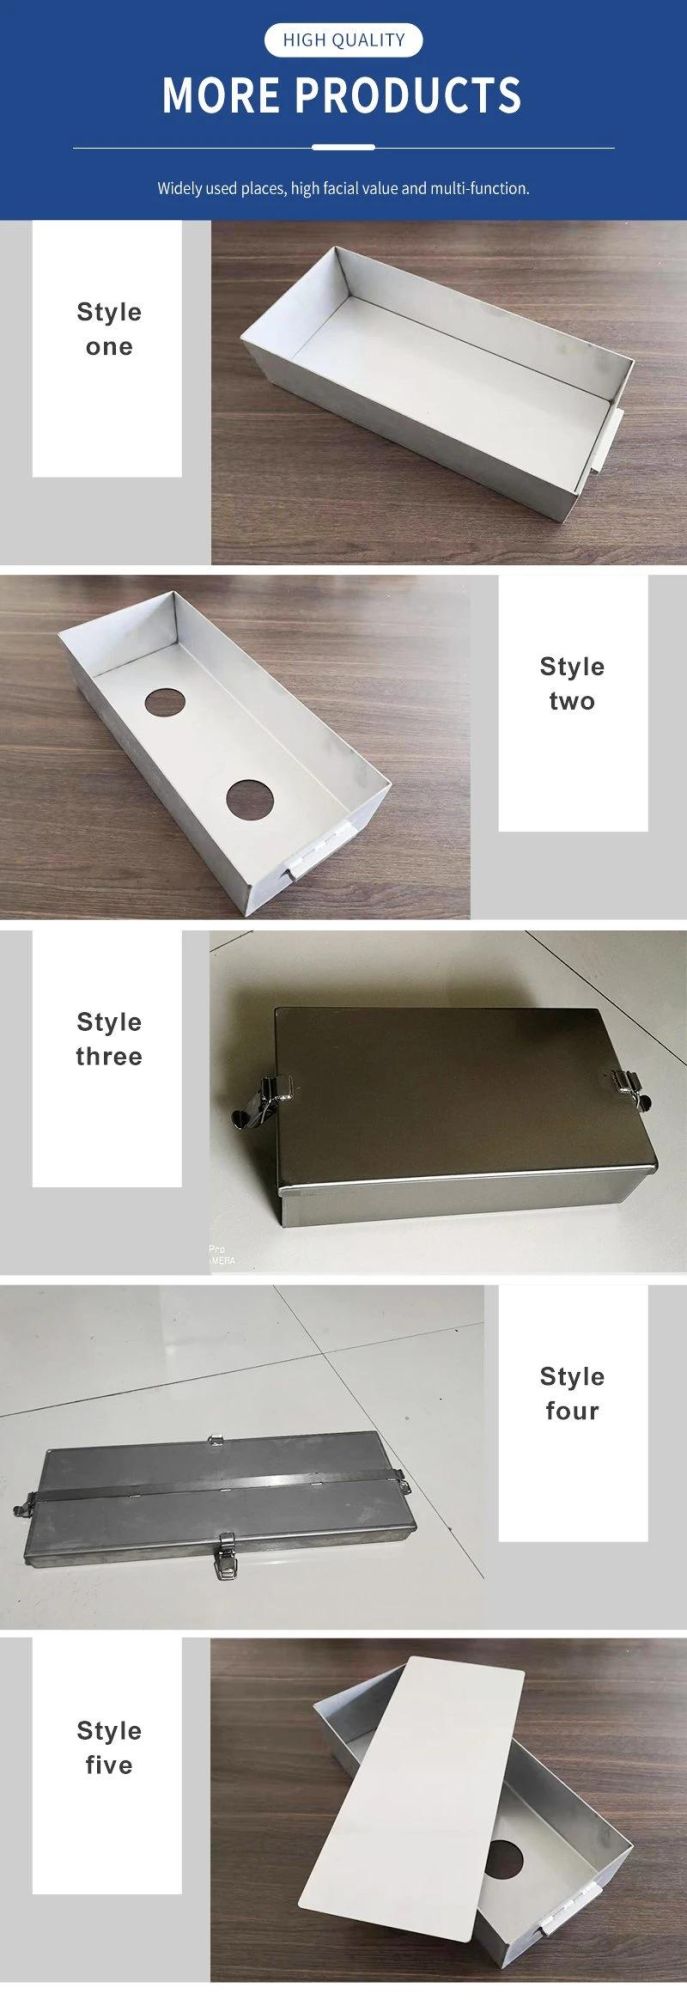 Factory Outlet High Quality Stainless Steel Box Mold